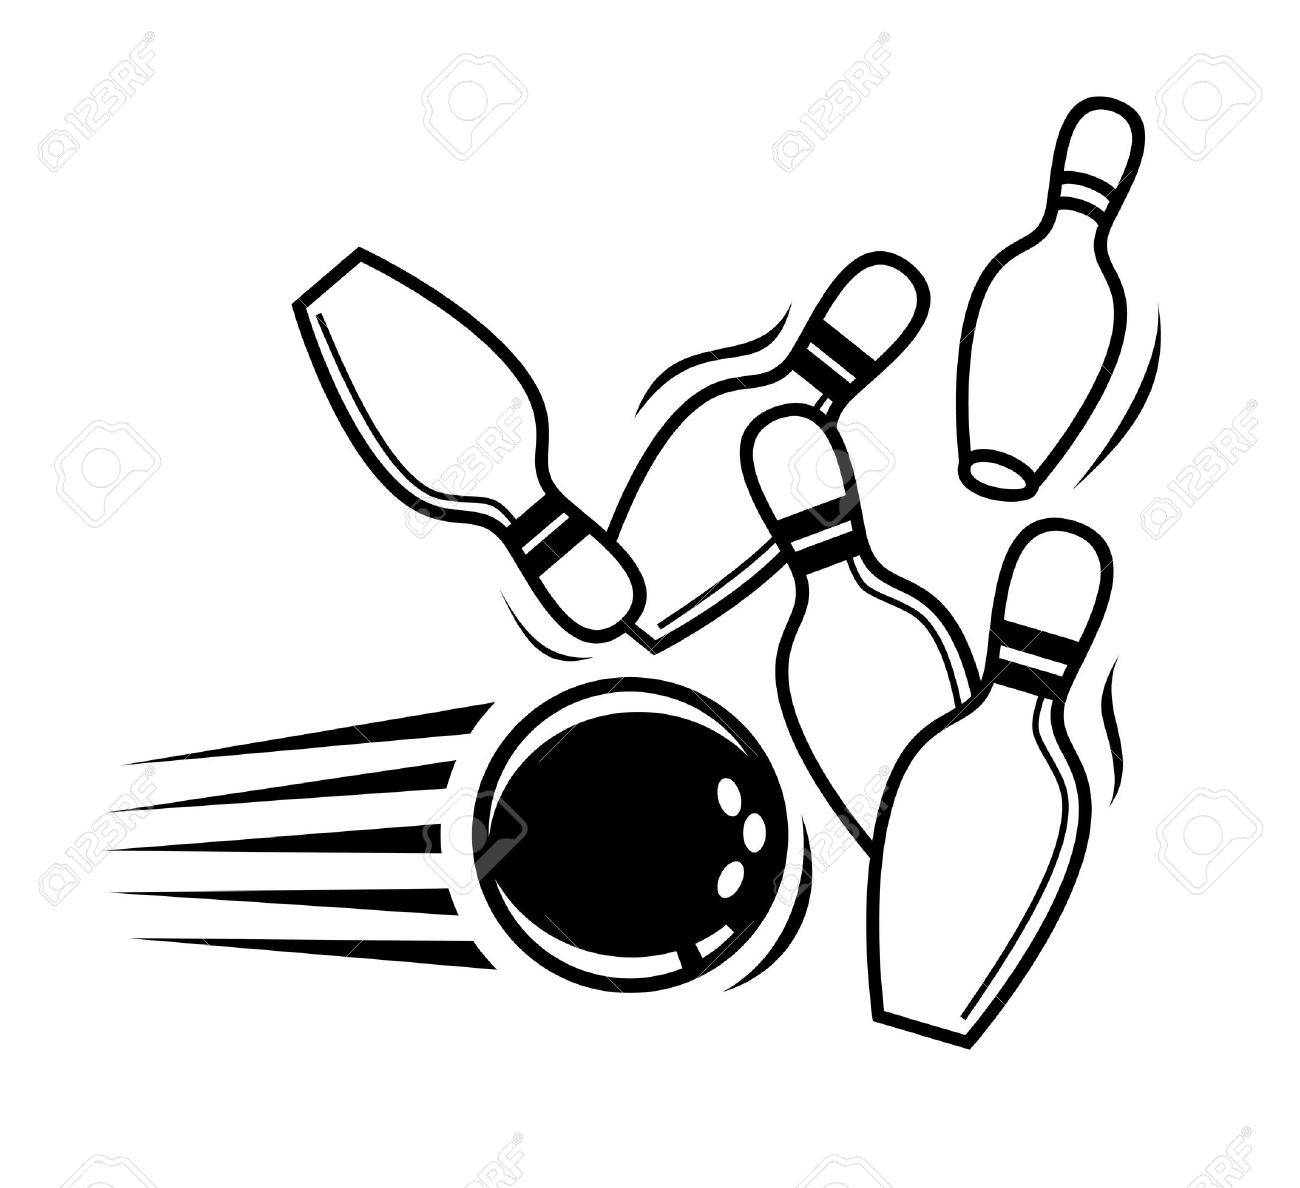 Bowling Silhouette Vector at GetDrawings Free download